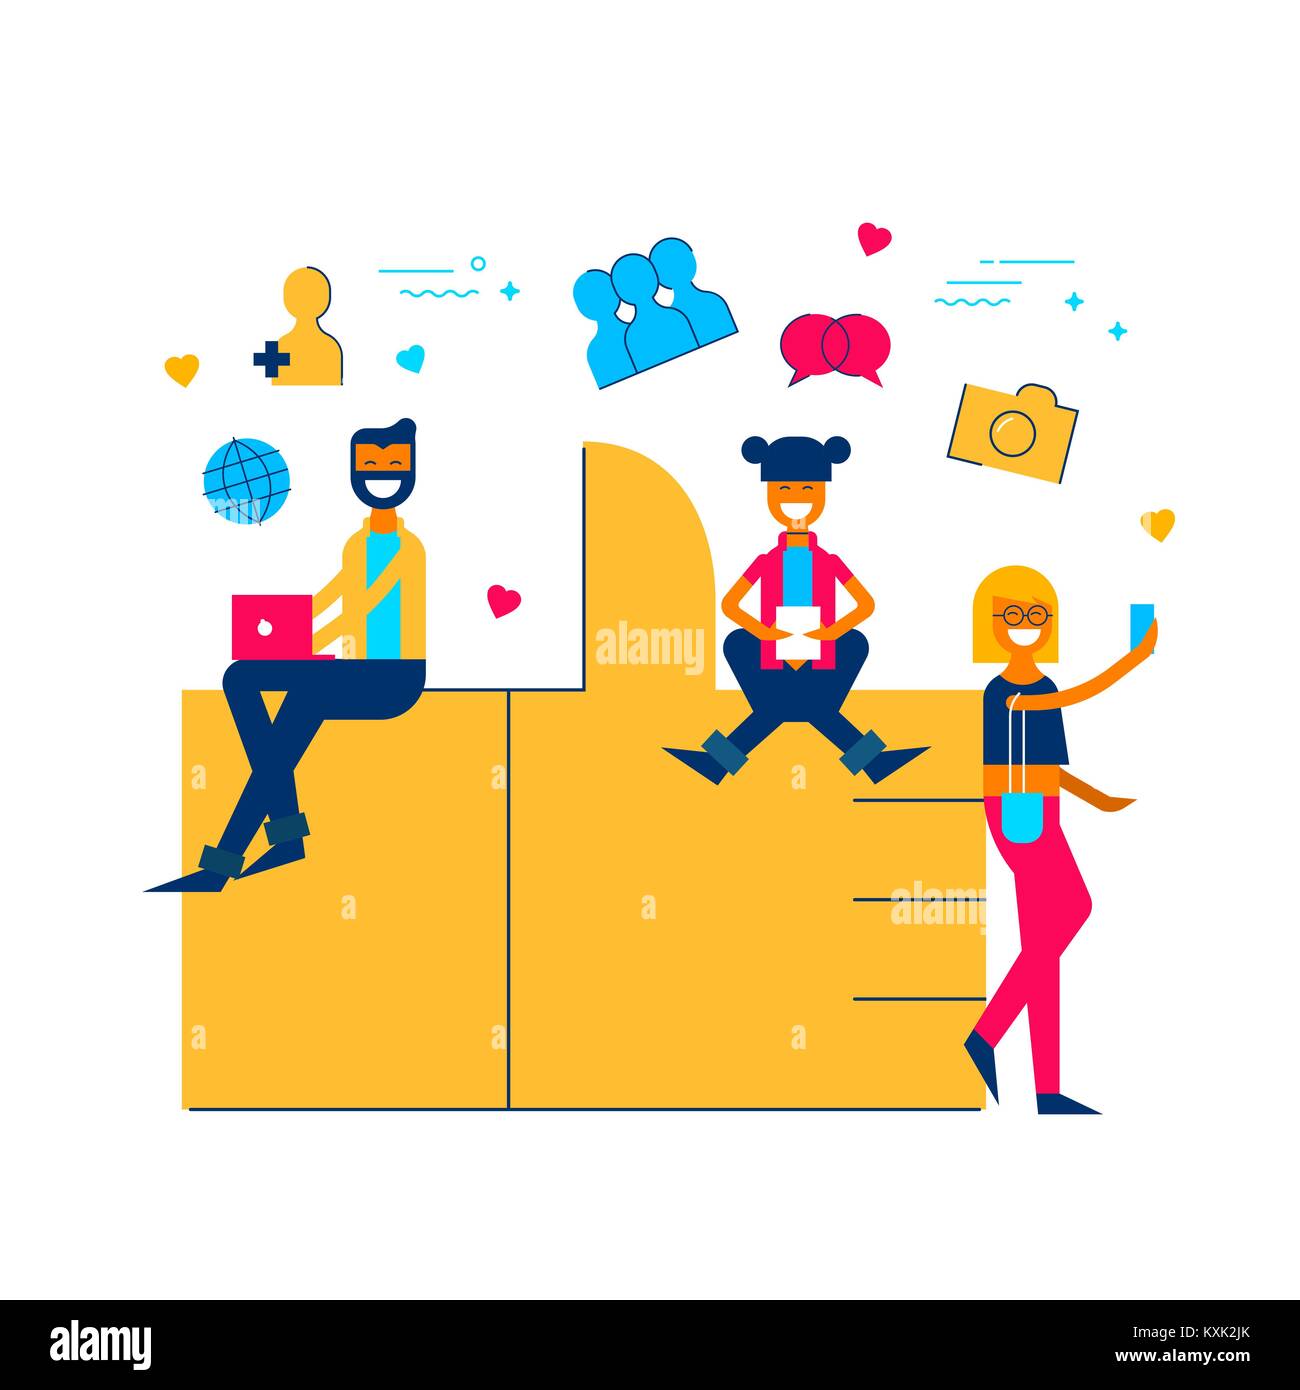 Thumbs up concept illustration in modern flat style, people sitting on like icon connected to social media network. EPS10 vector. Stock Vector